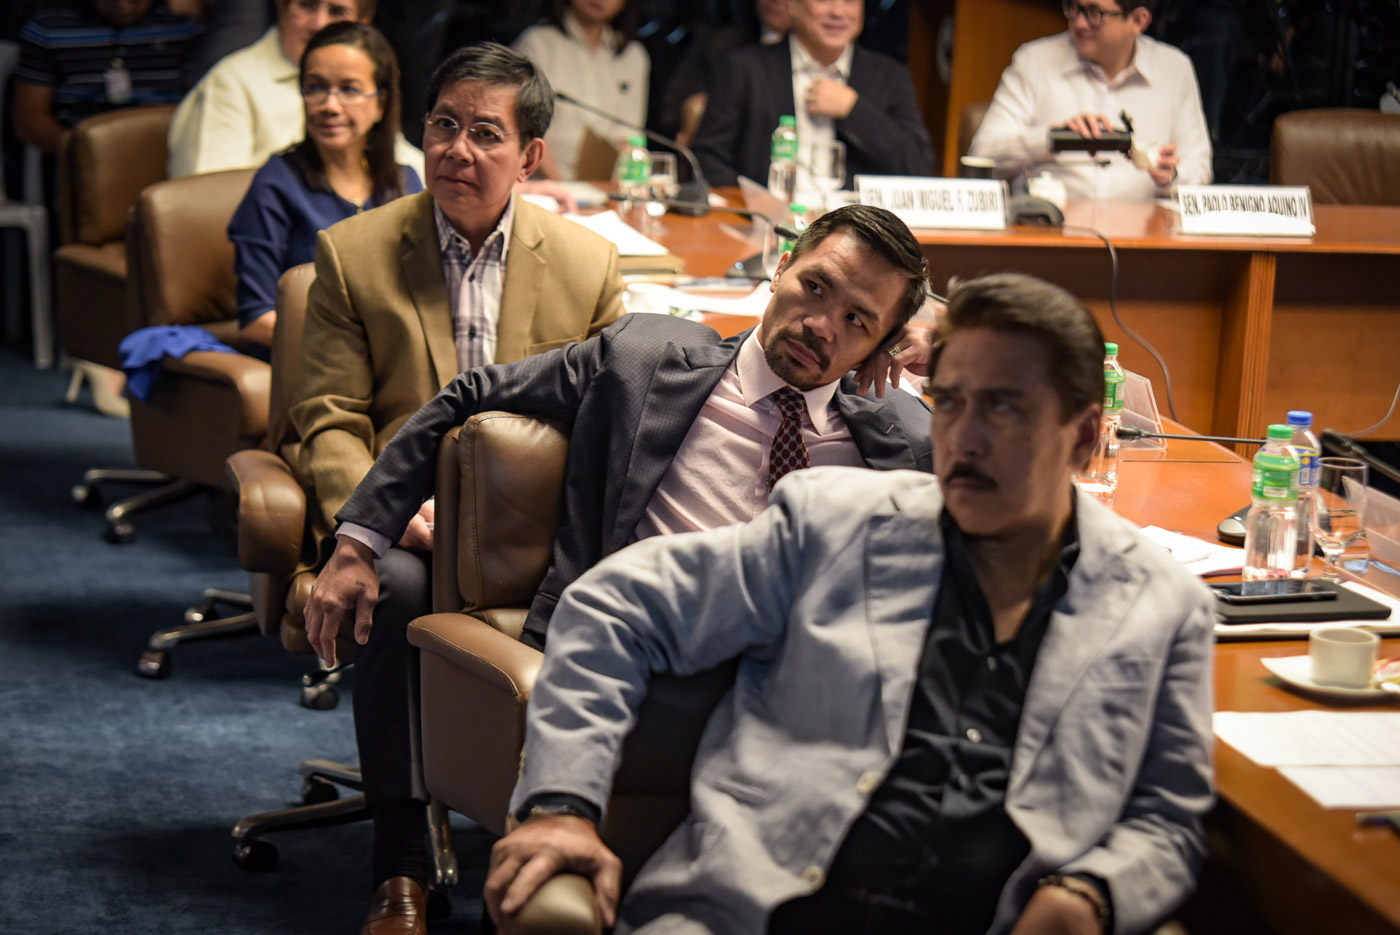 CONTINUE. The Senate committee on public order and dangerous drugs conducts a public inquiry on the death of Albuerra, Leyte Mayor Rolando Espinosa Sr. on November 10, 2016. Photo by LeAnne Jazul/Rappler  